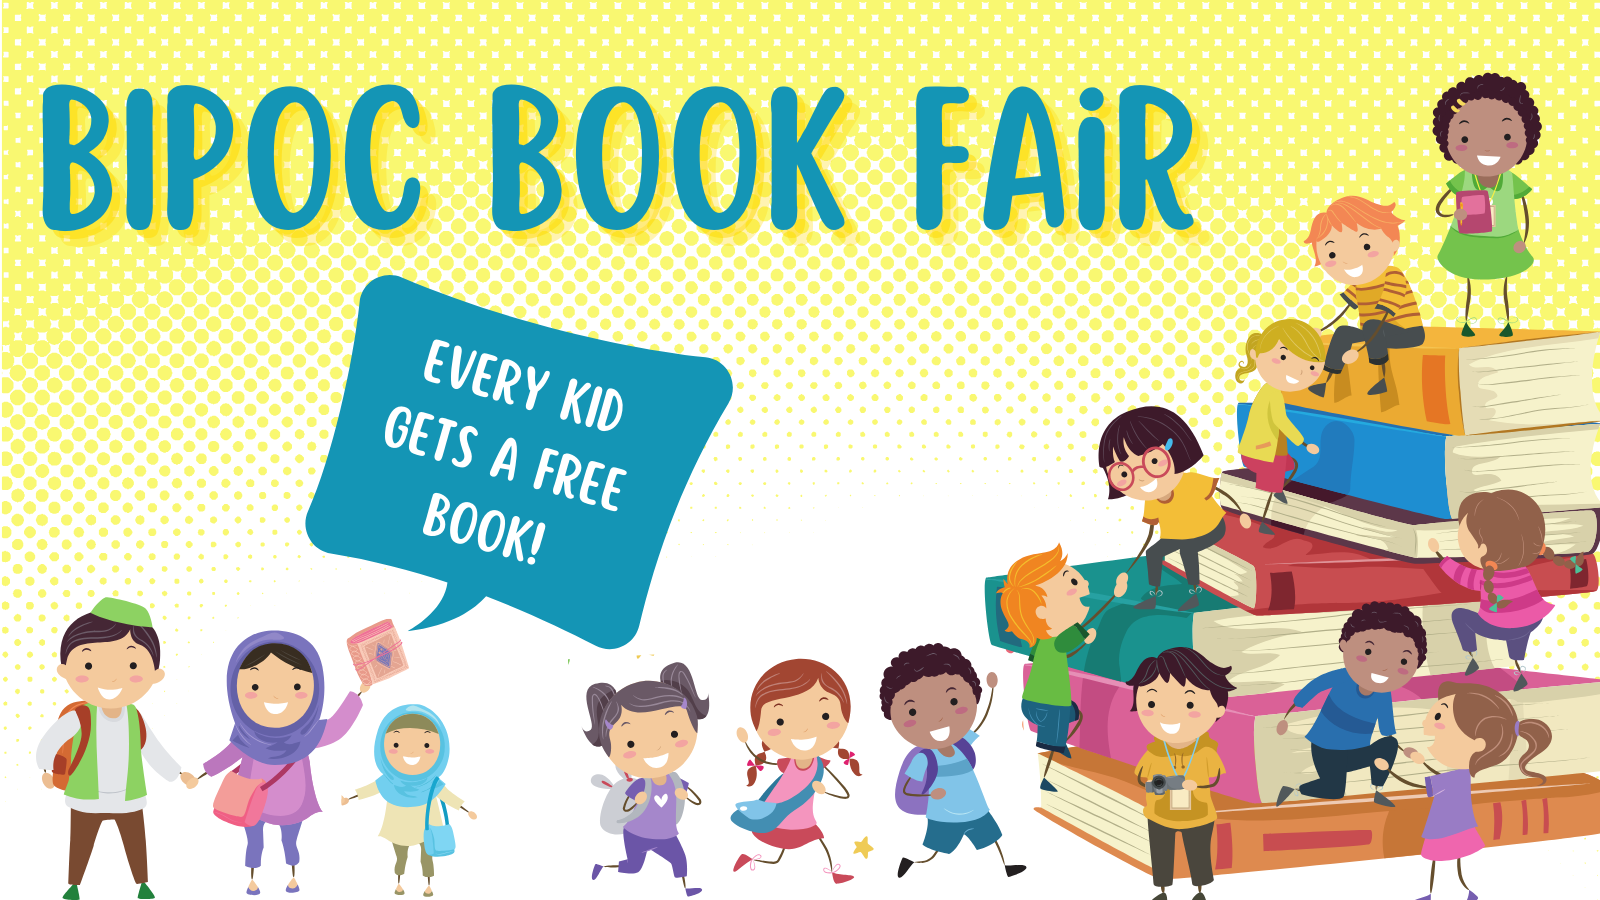 book fair header showing children of all races excitedly climbing a giant stack of books